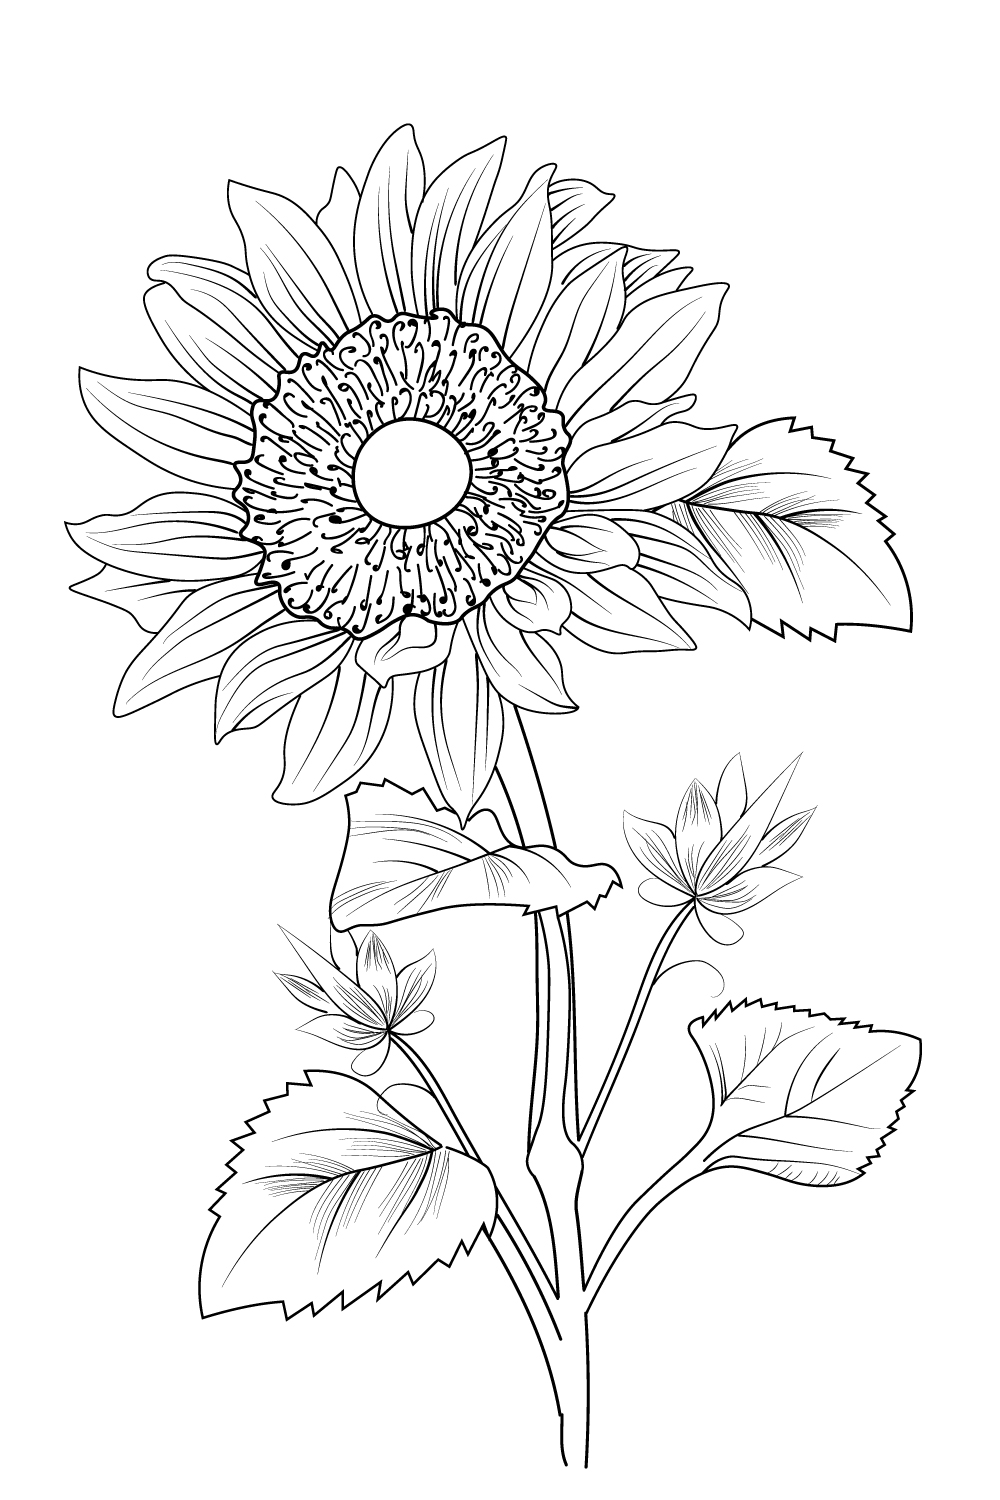 24,319 Sunflower Outline Images, Stock Photos, 3D objects, & Vectors |  Shutterstock